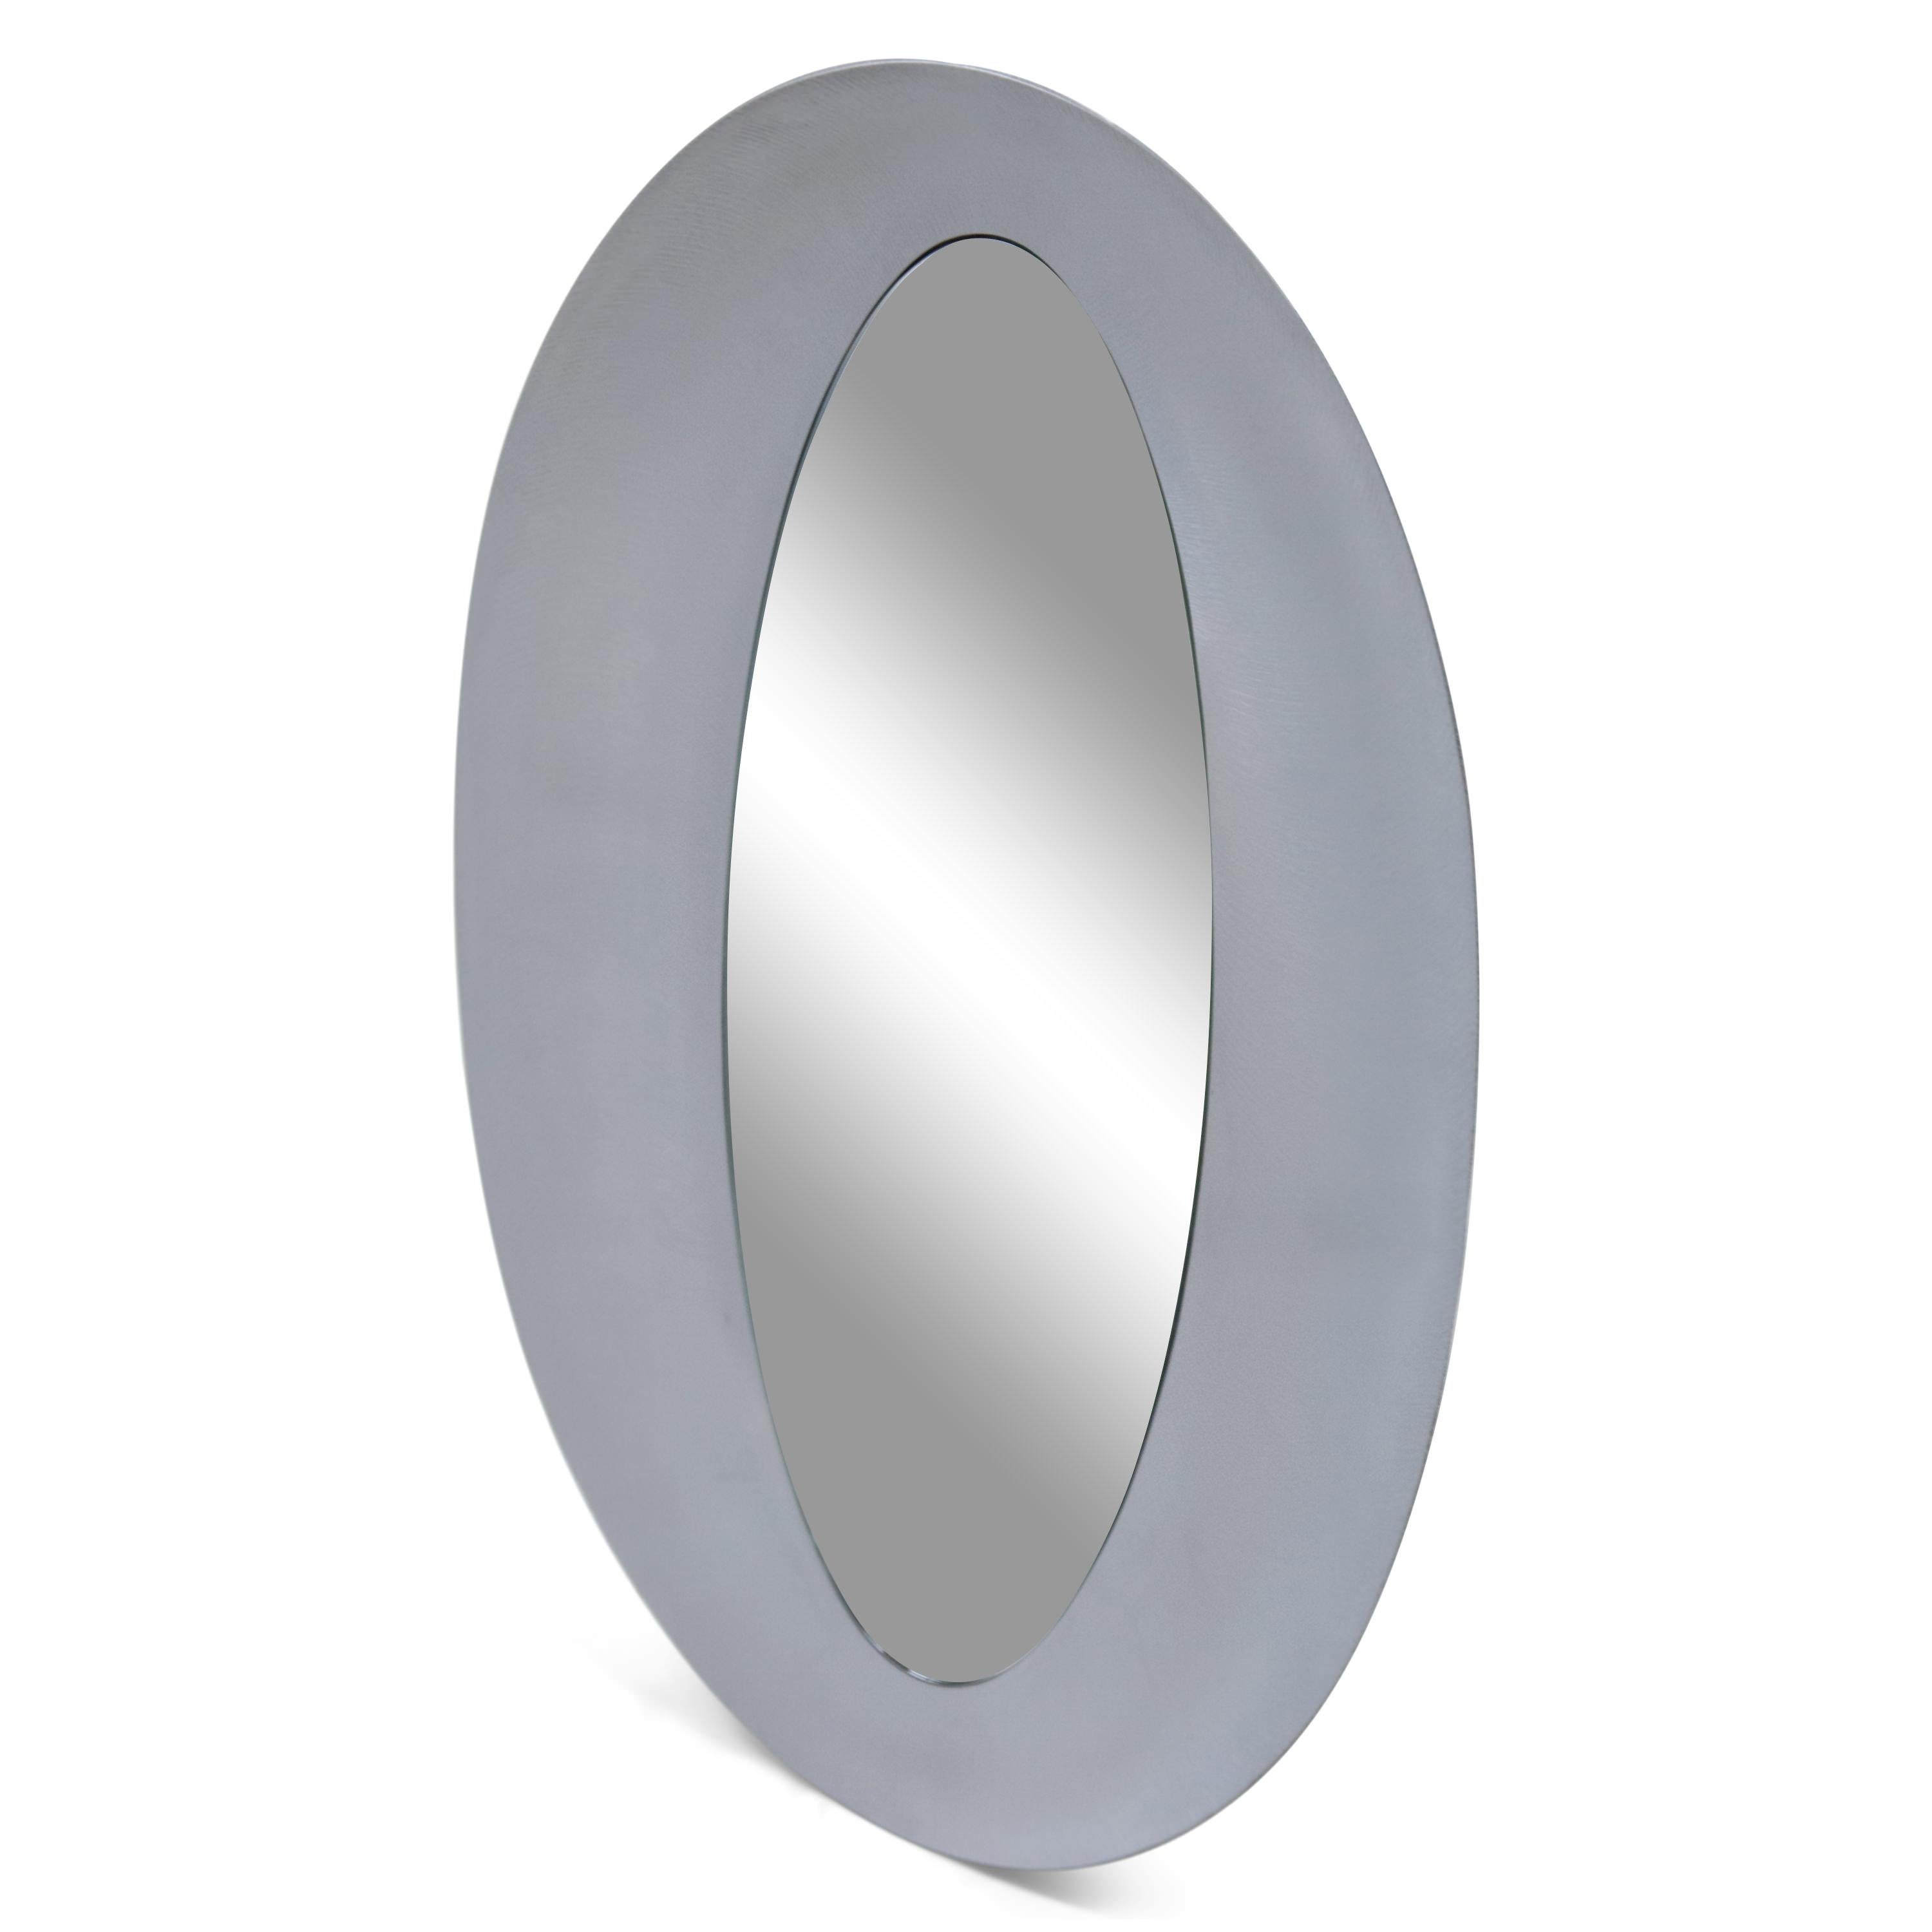 A sculptural modernist oval mirror
by artist Lorenzo Burchiellaro.
Textured cast aluminum
with a slightly concave shape.
Signed on the bottom Burchiellaro.
        